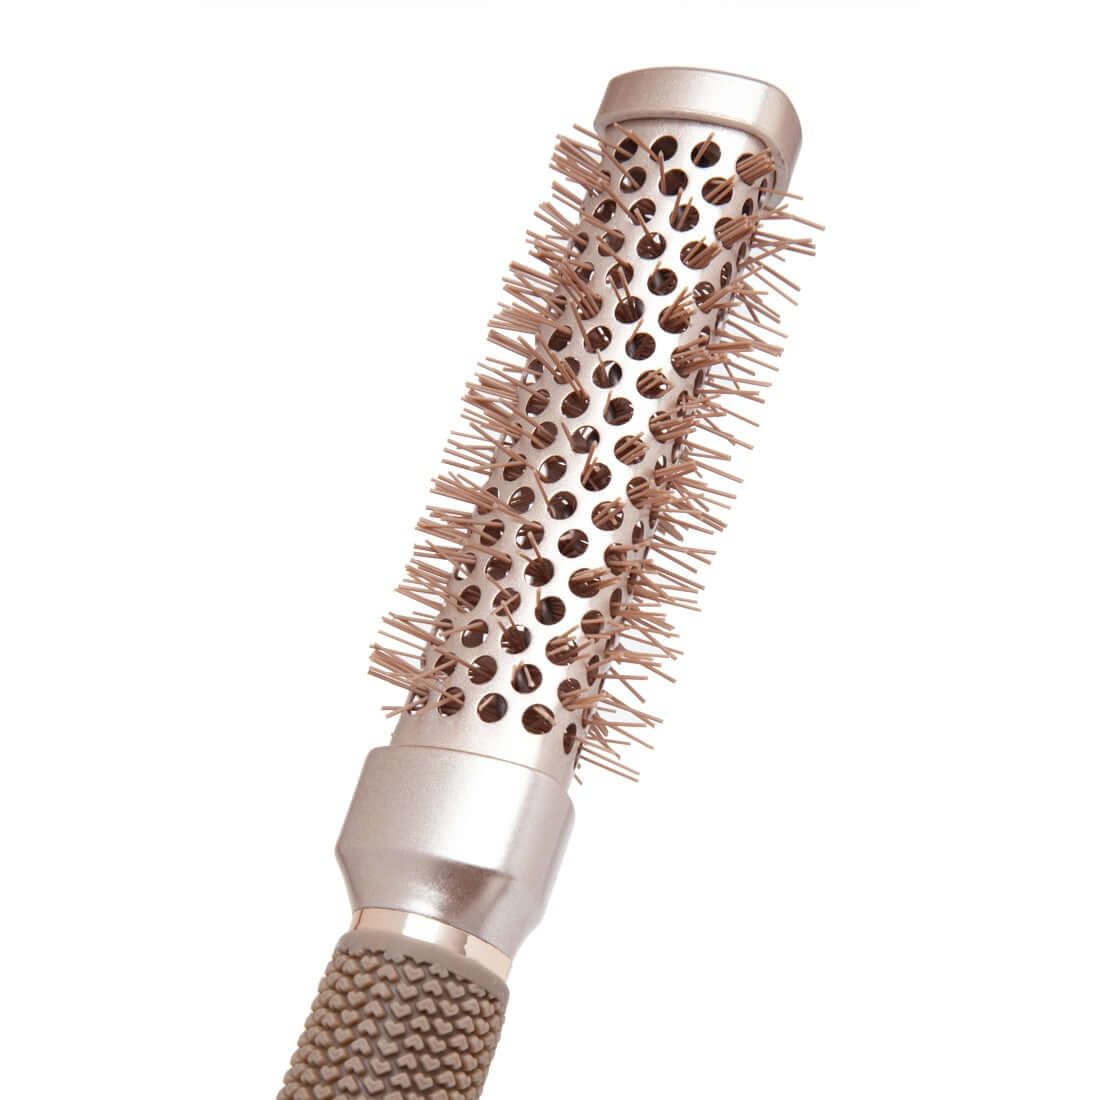 Zoomed in view of bristles TYME Triangle Hair Brush and triangularly shaped barrel.